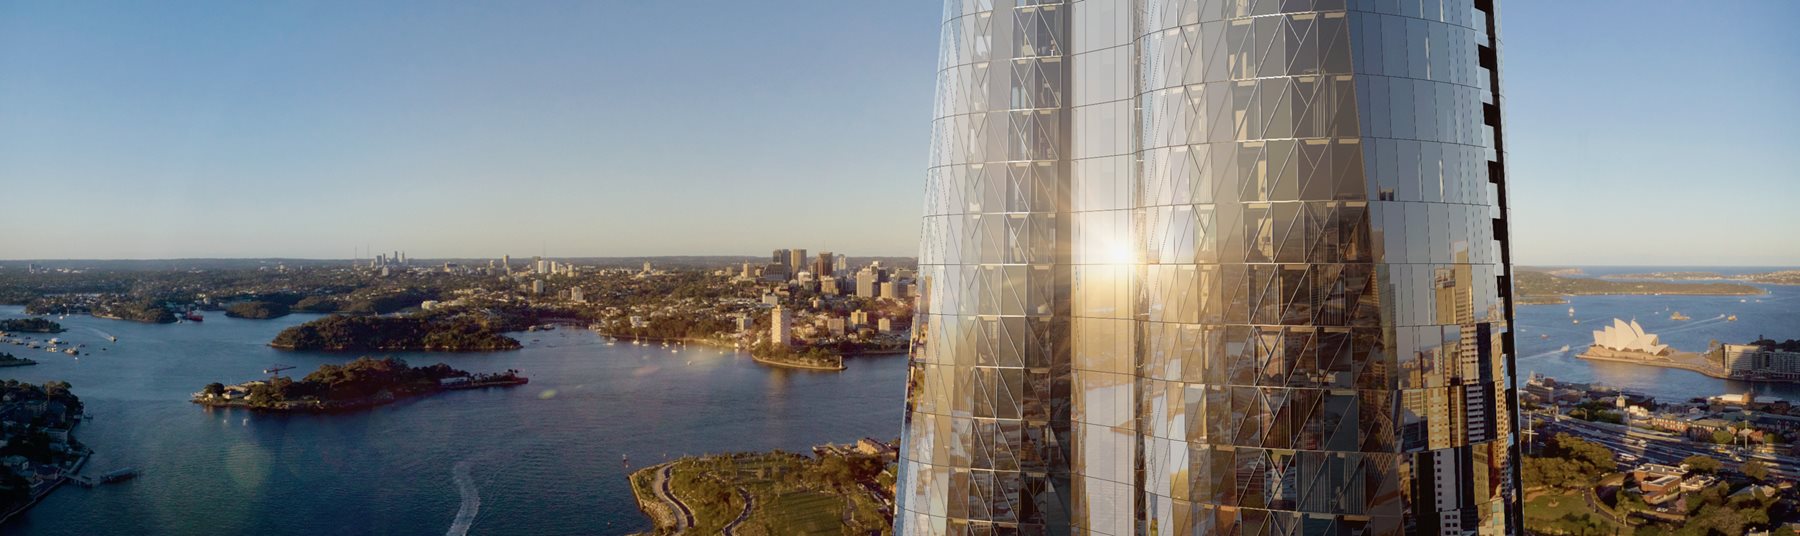 Crown Sydney Skyline Drone View Mid Tower